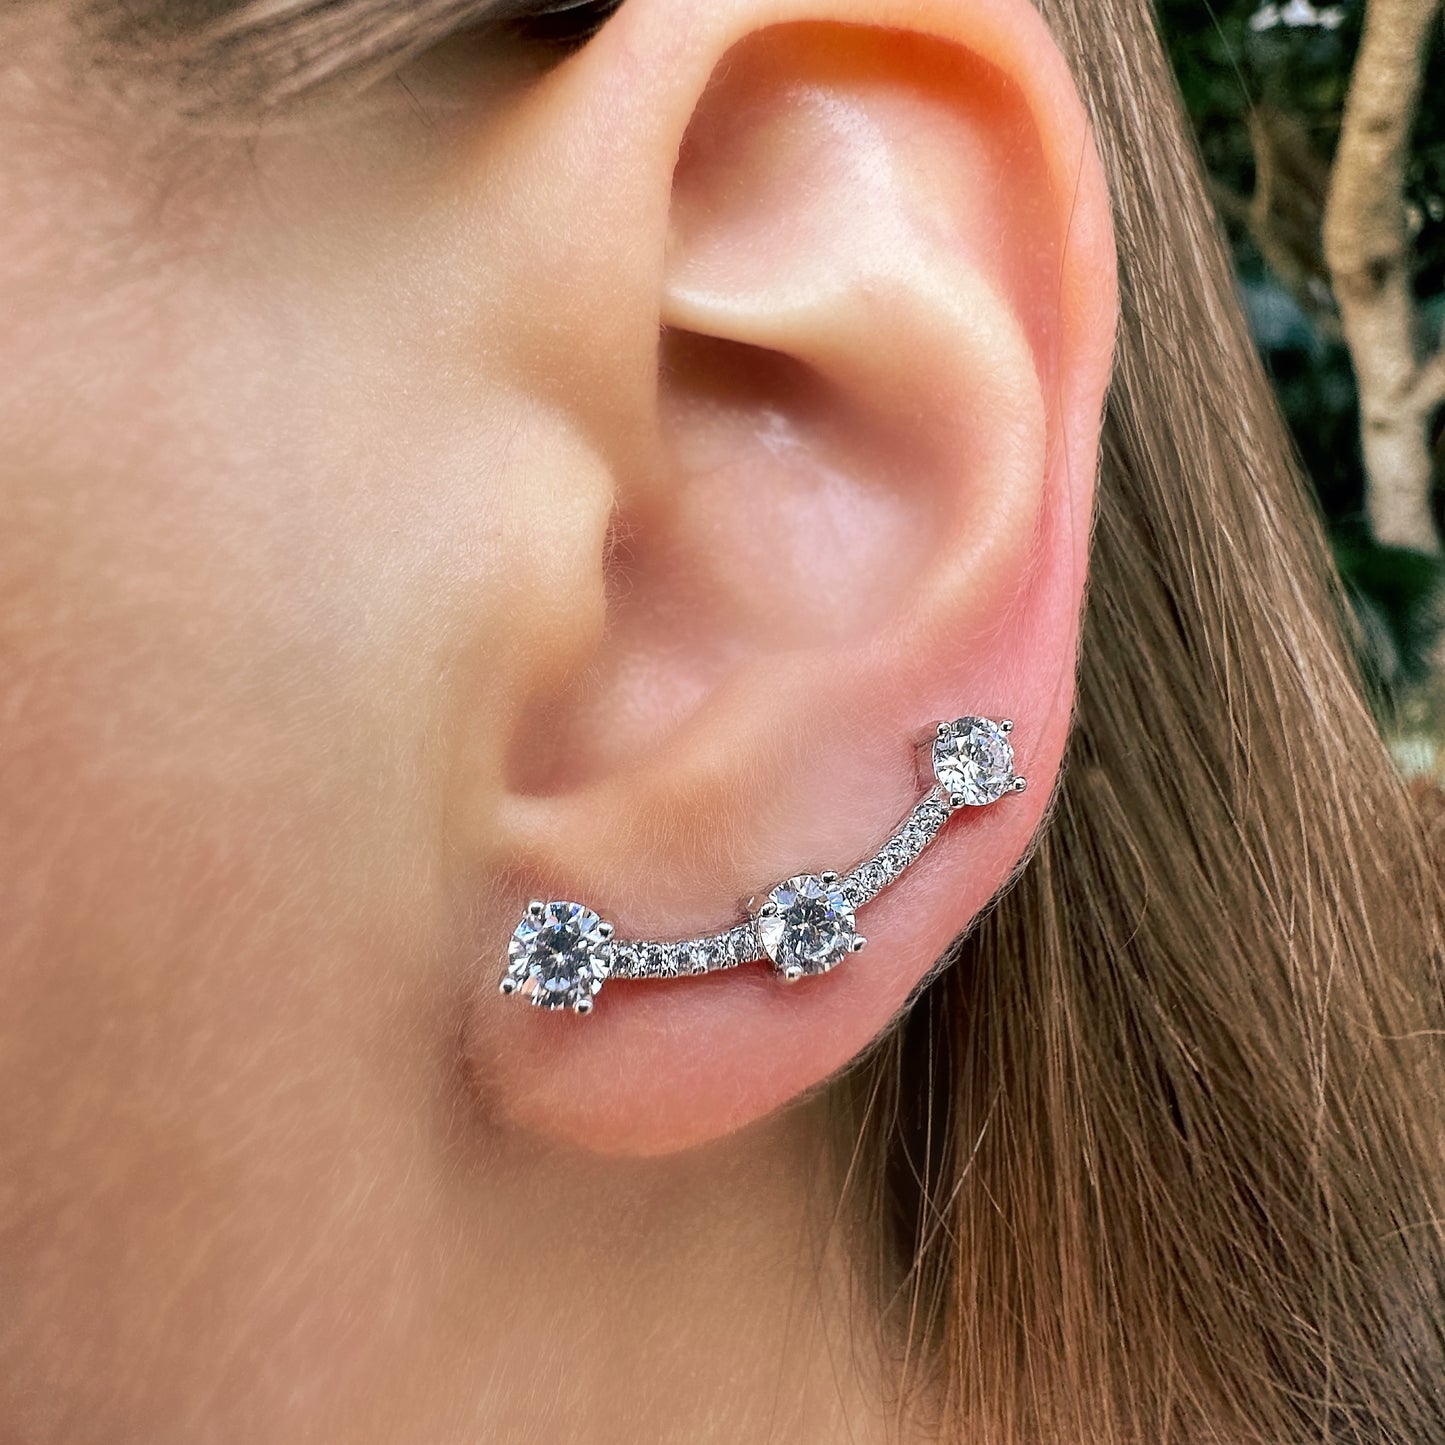 Angel ear climbers with CZ diamonds - Sterling Silver 925